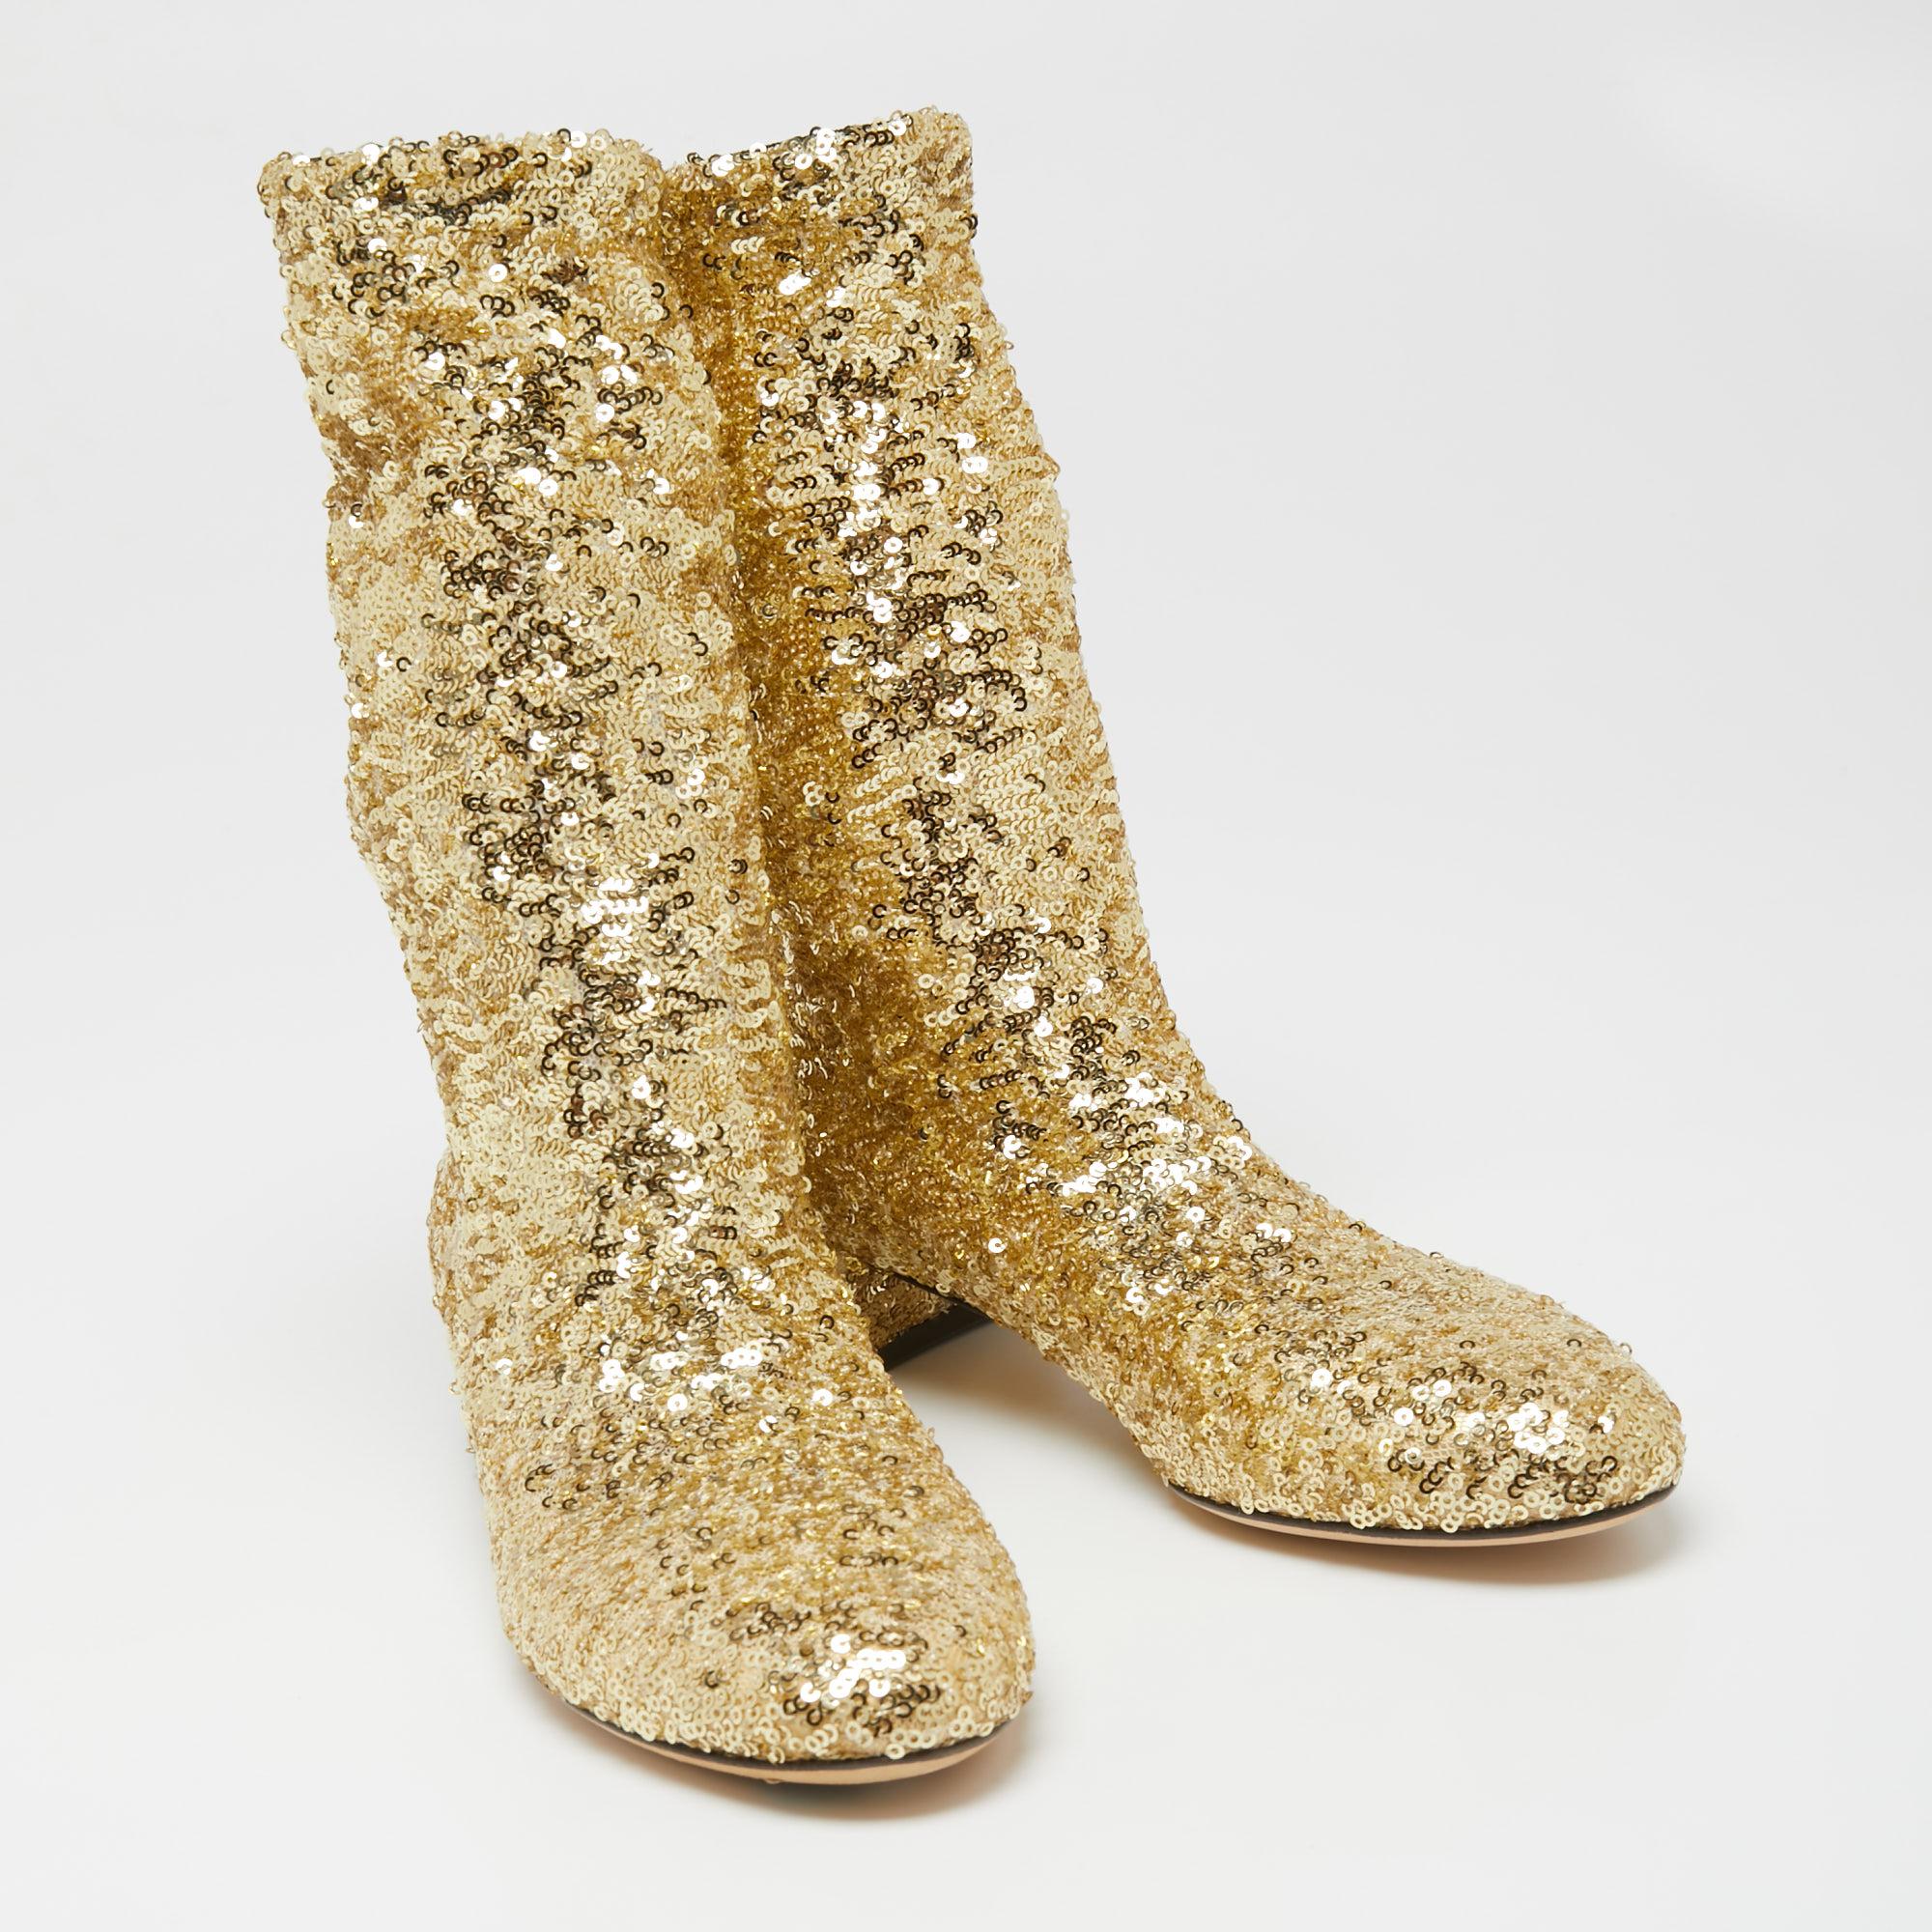 Dolce & Gabbana Gold Sequin Ankle Boots Size 36 1